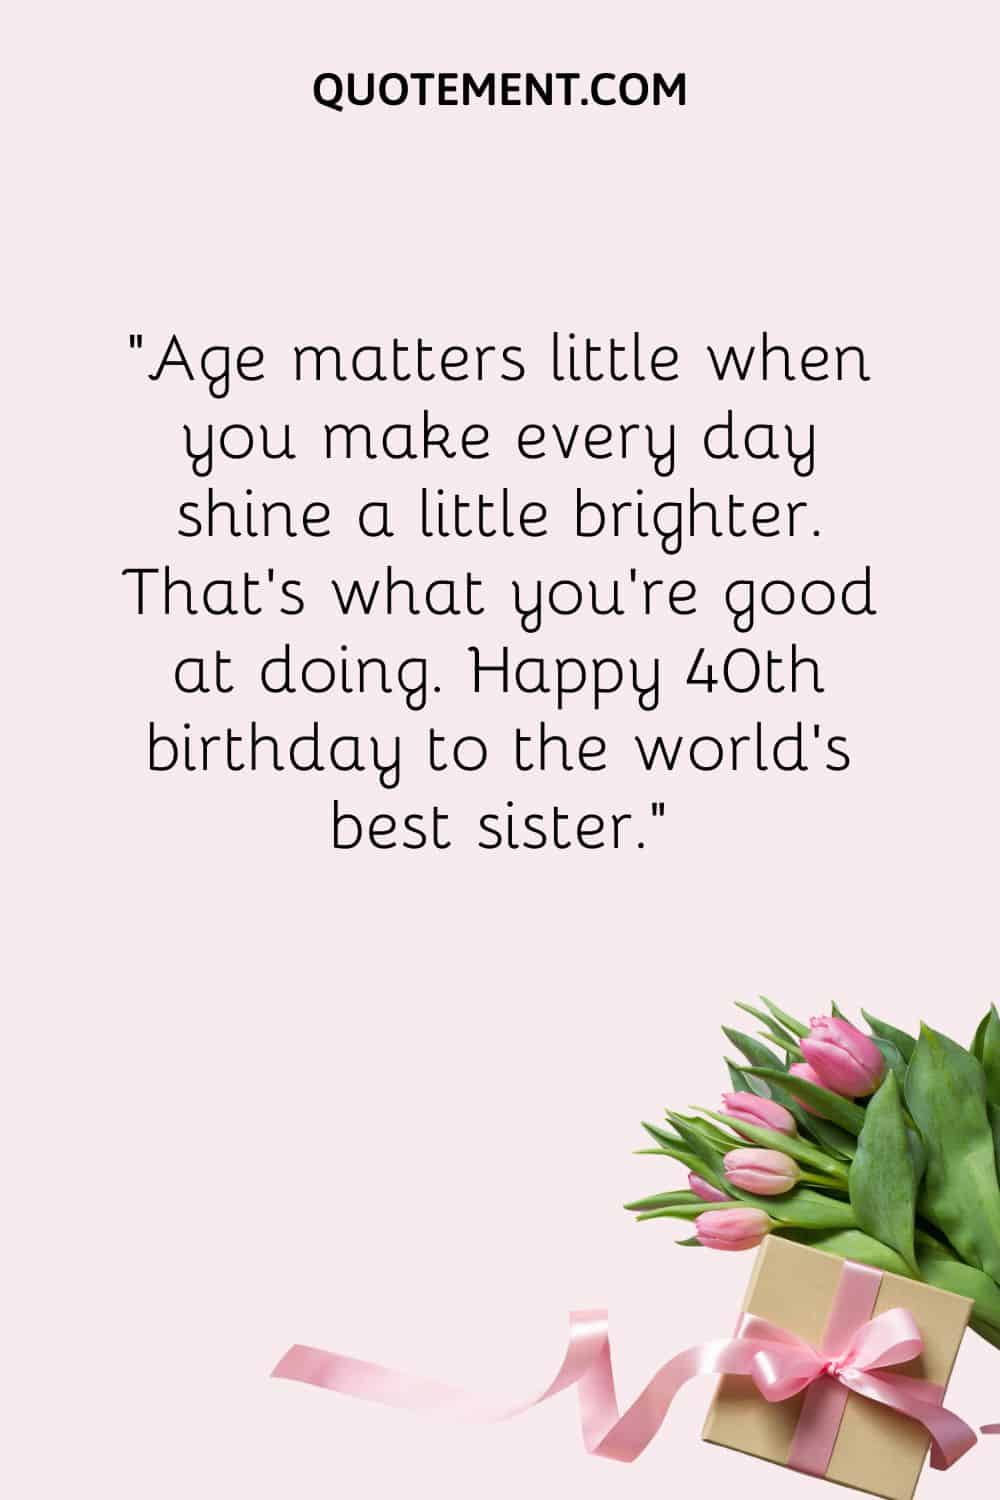 Age matters little when you make every day shine a little brighter